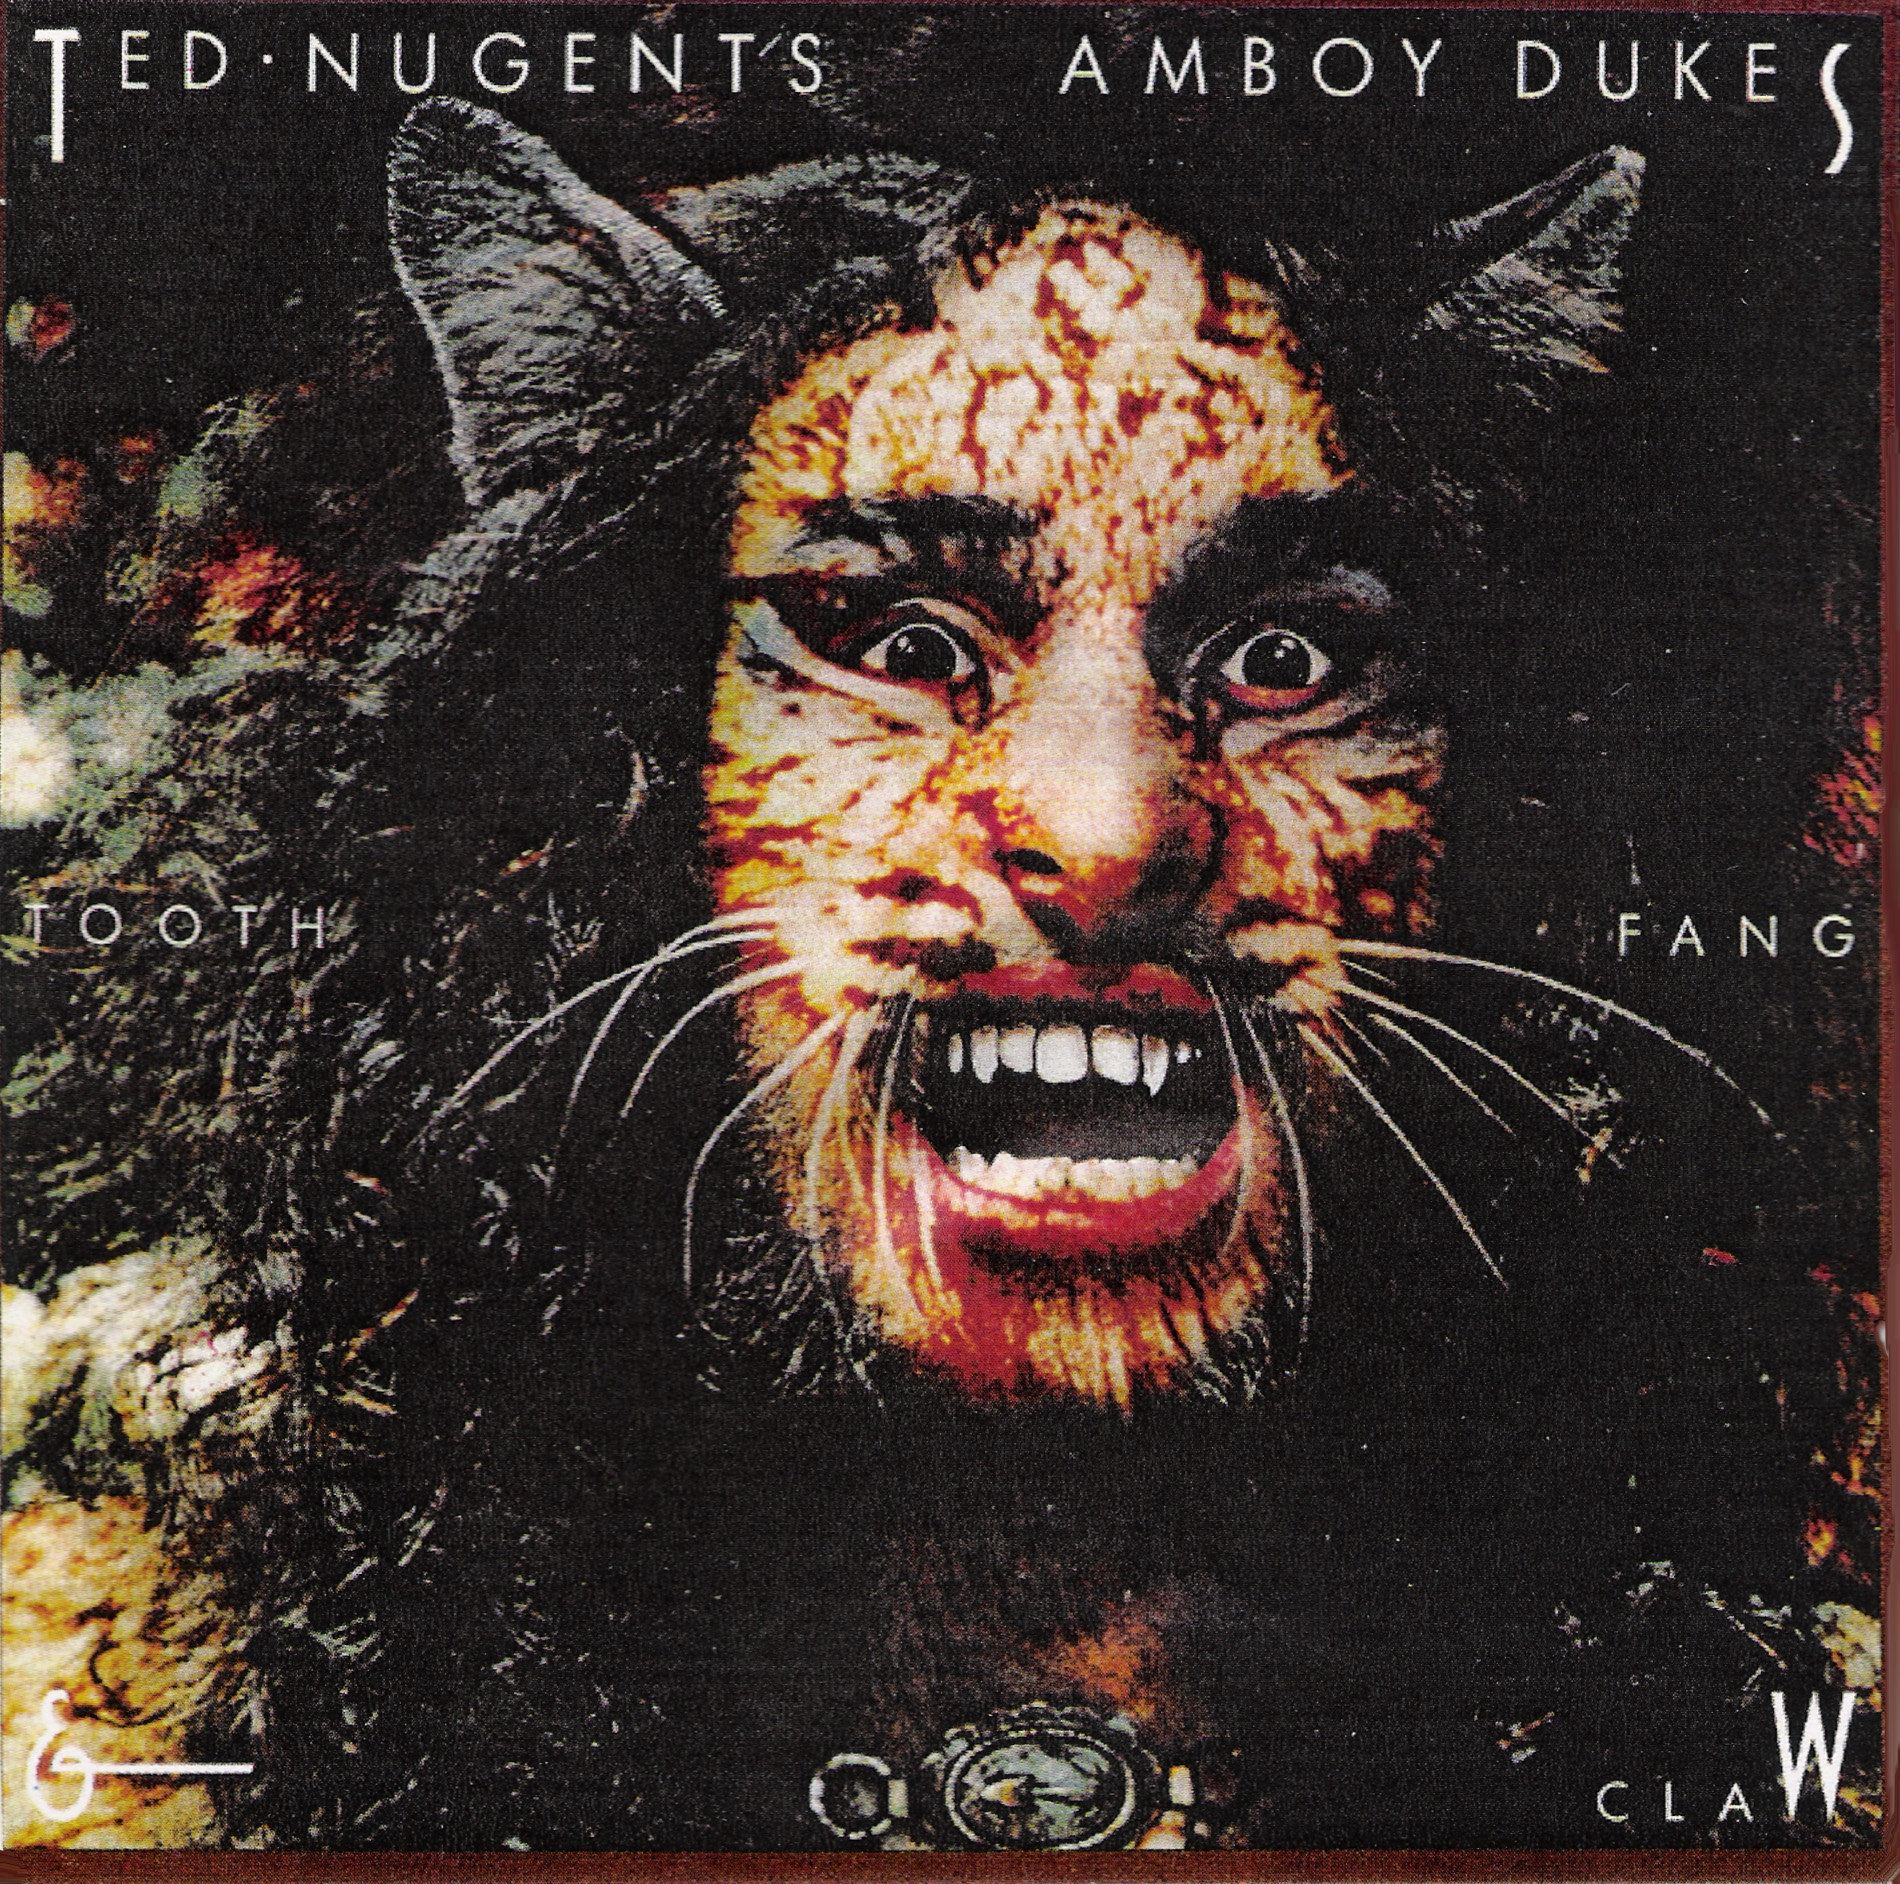 Ted Nugent & The Amboy Dukes Tooth, Fang And Claw 1974